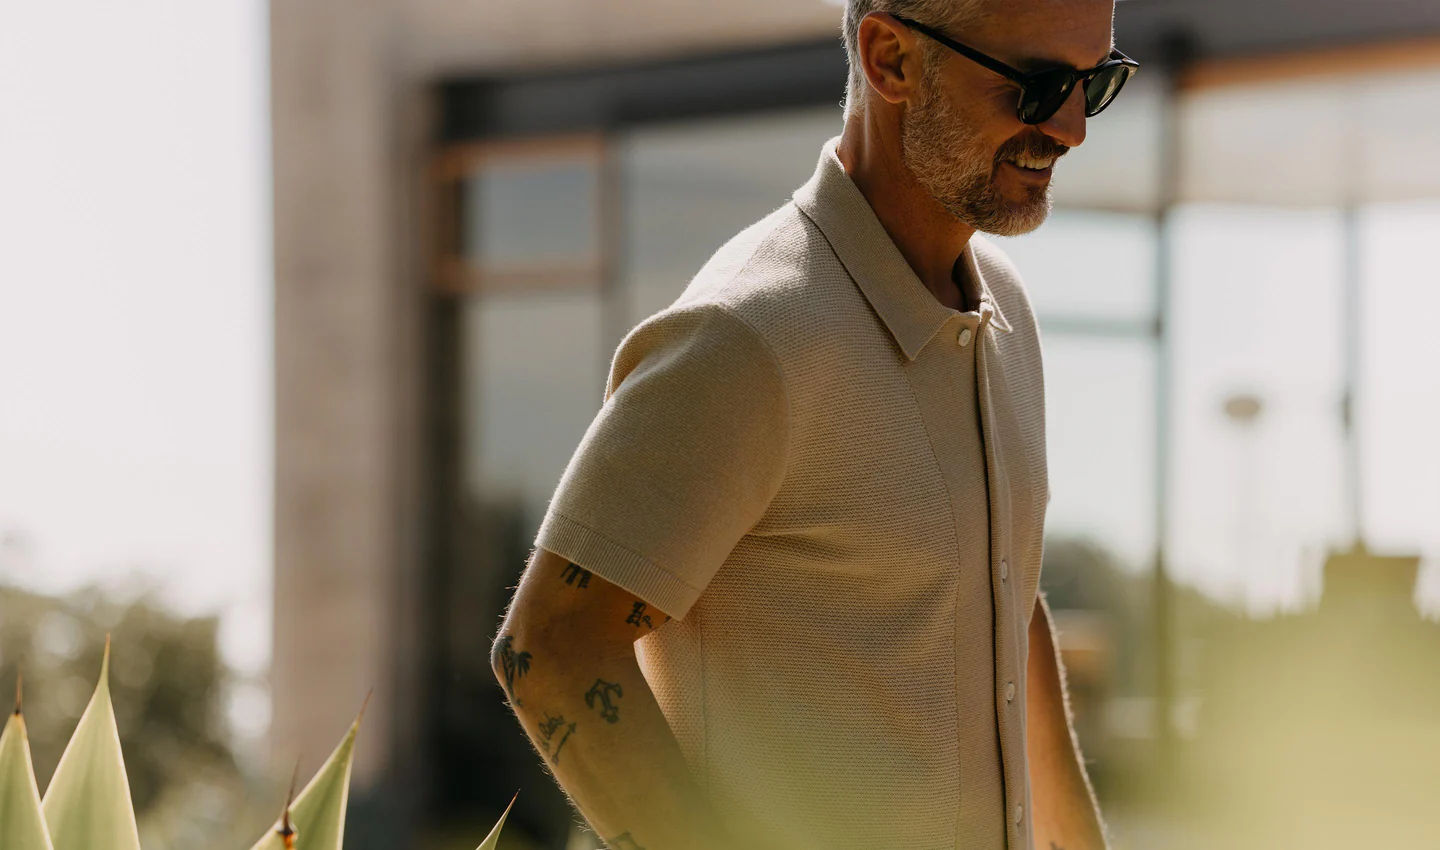 8 of the coolest short sleeve shirts for summer from Taylor Stitch